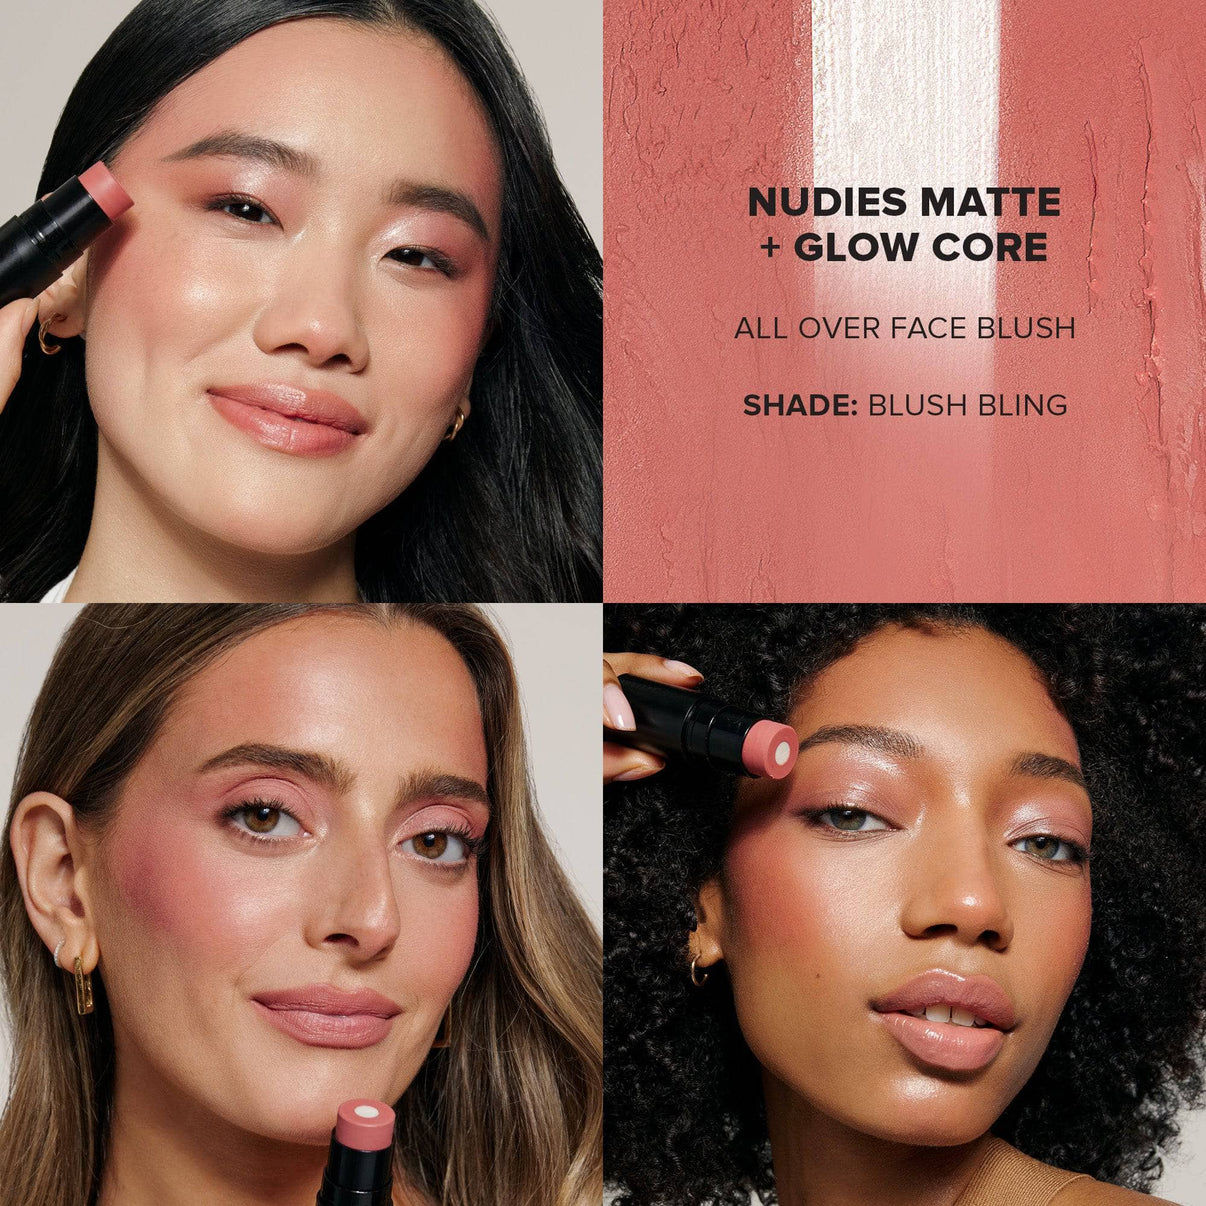 Grid with three models wearing Blush bling from Pink Blush & Glow Core Kit - 5